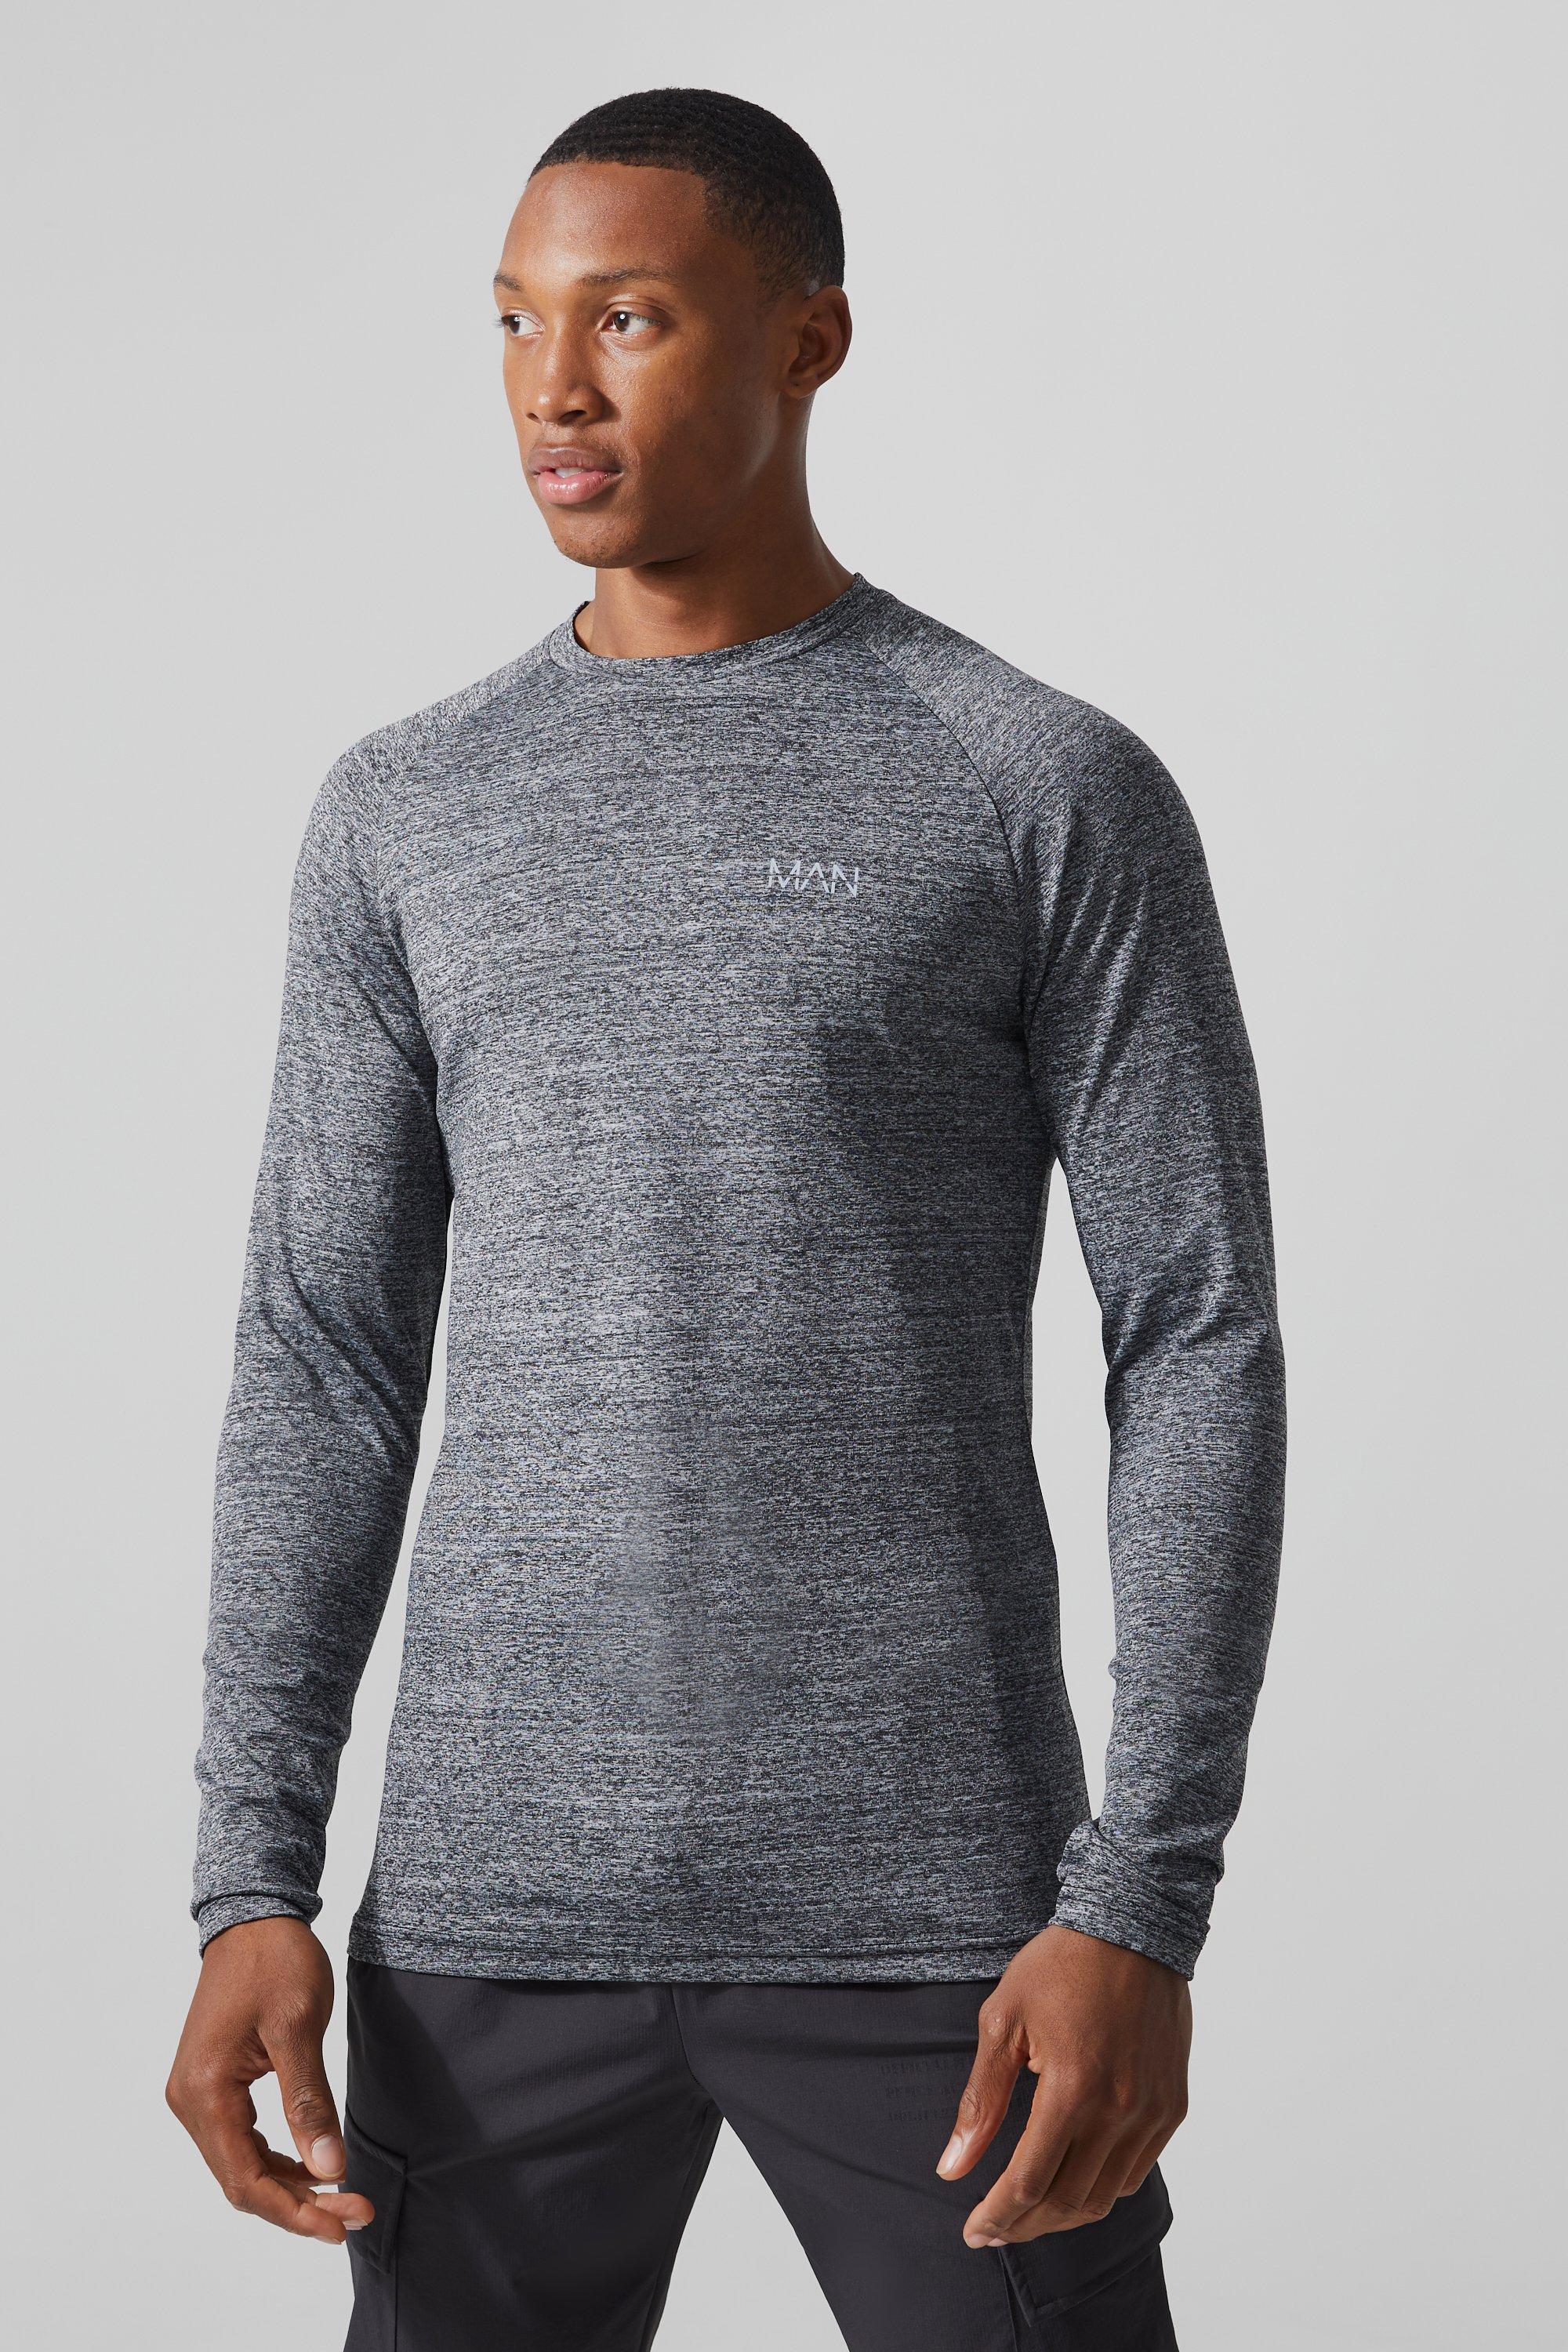 Mens Grey Man Active Muscle Fit Space Dye Long Top, Grey